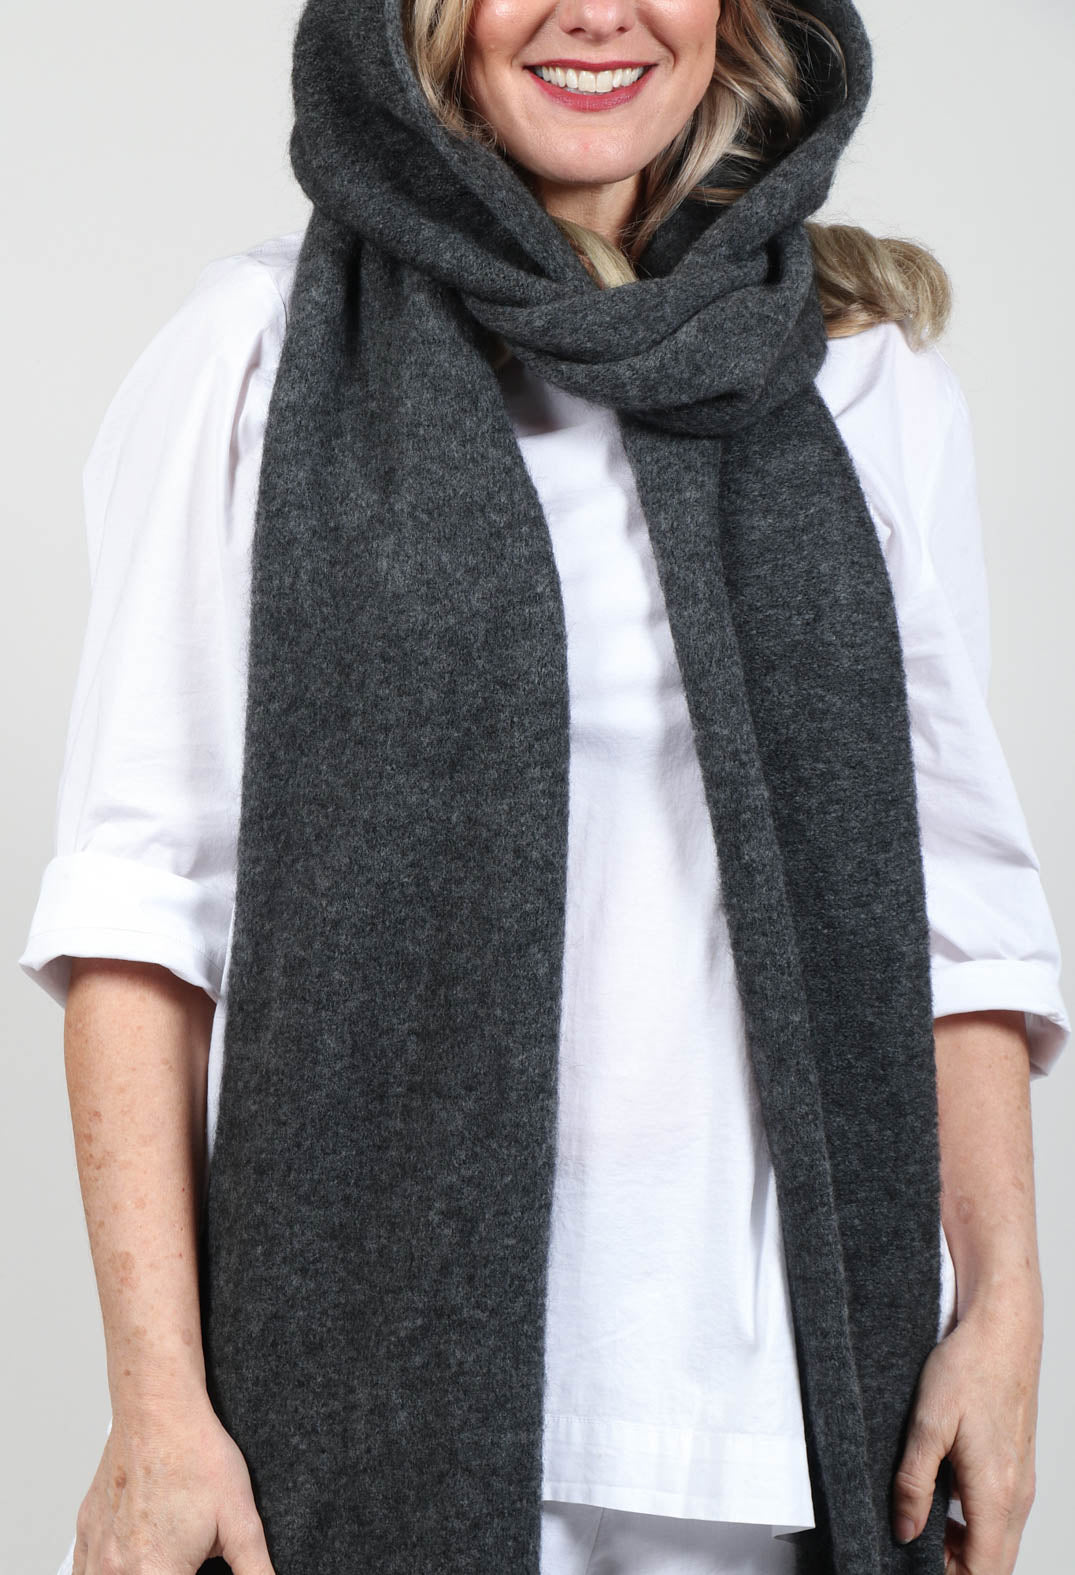 Hooded Scarf in Graphite